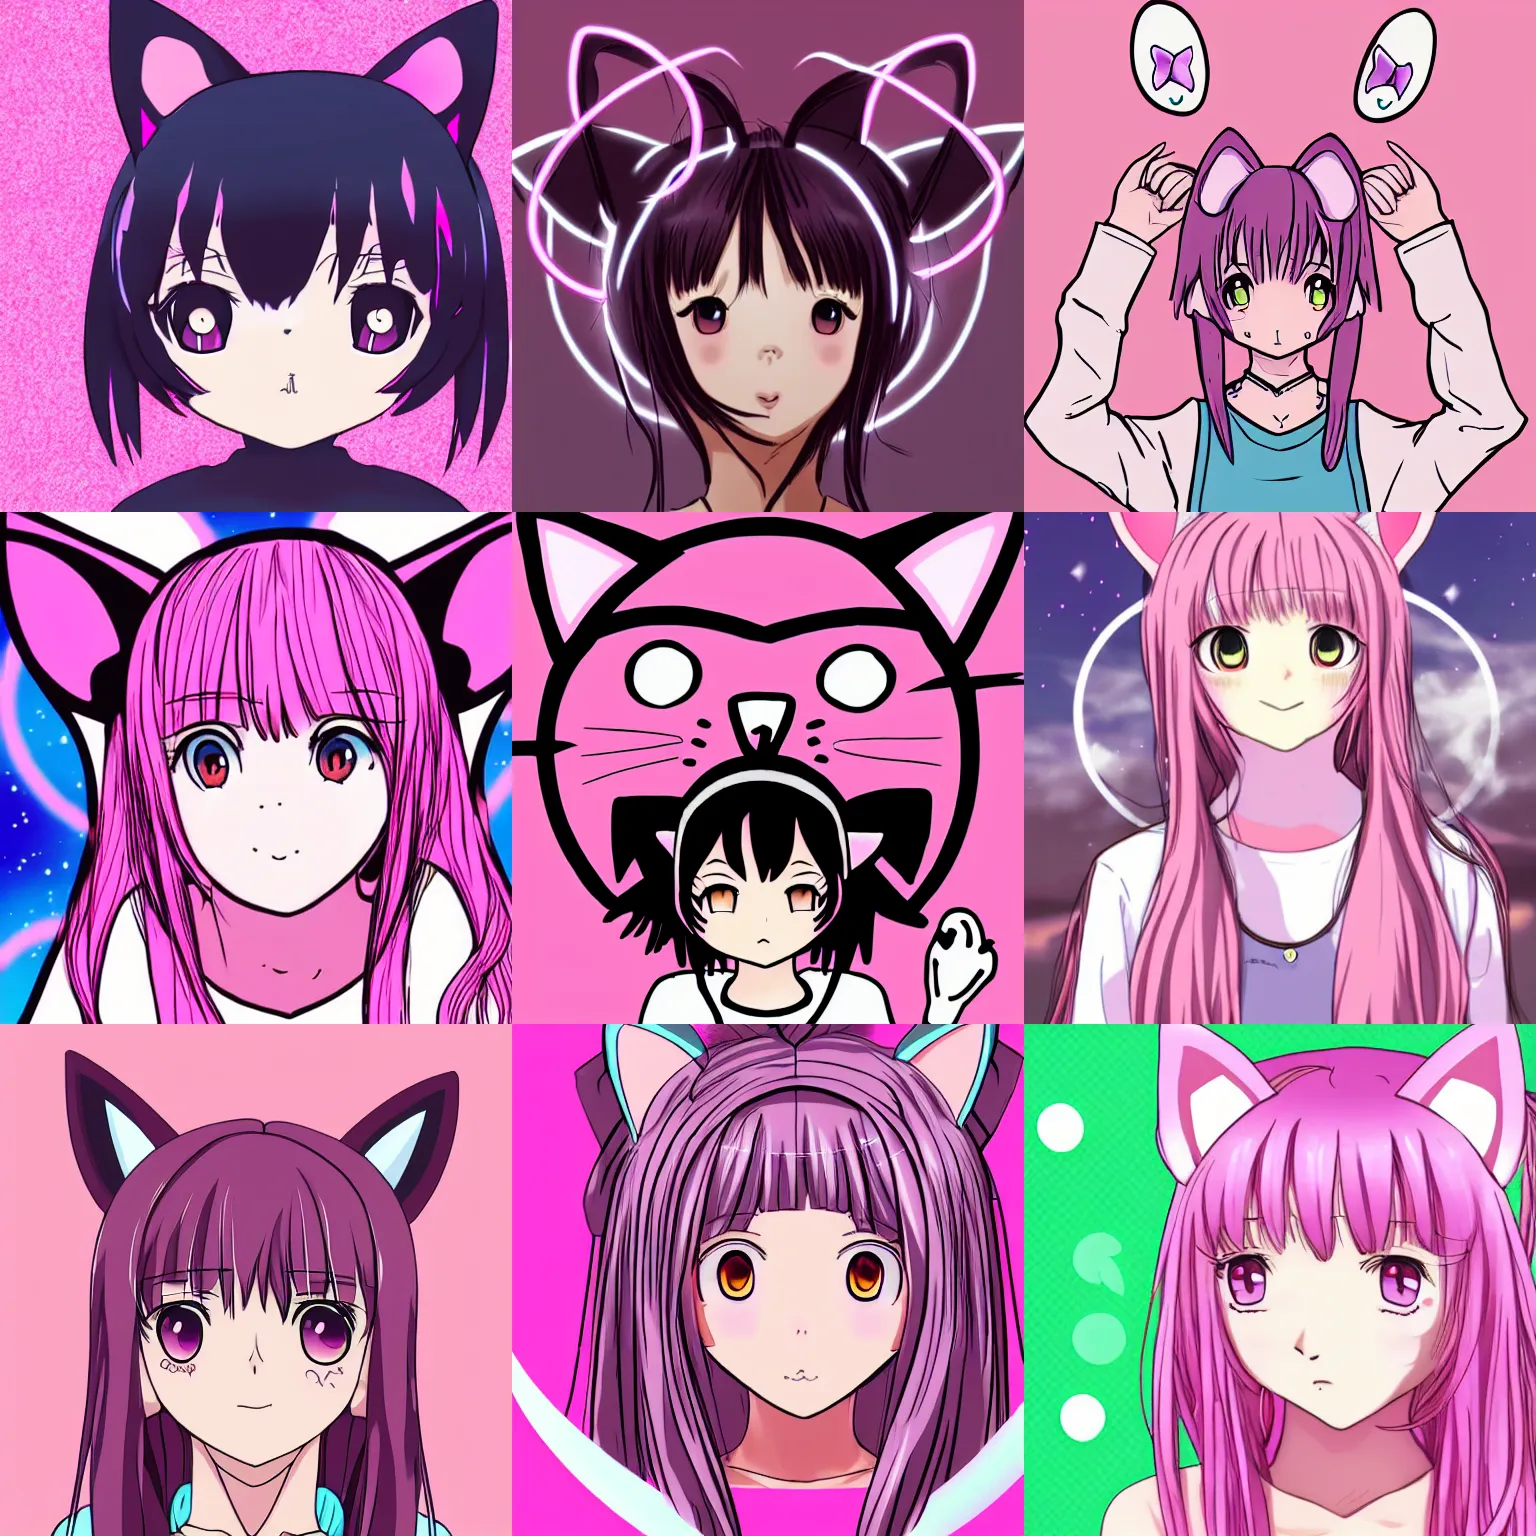 Prompt: frontal portrait of an anime (cat) girl with cat ears drawing magic circles. Pink hue. Beautiful